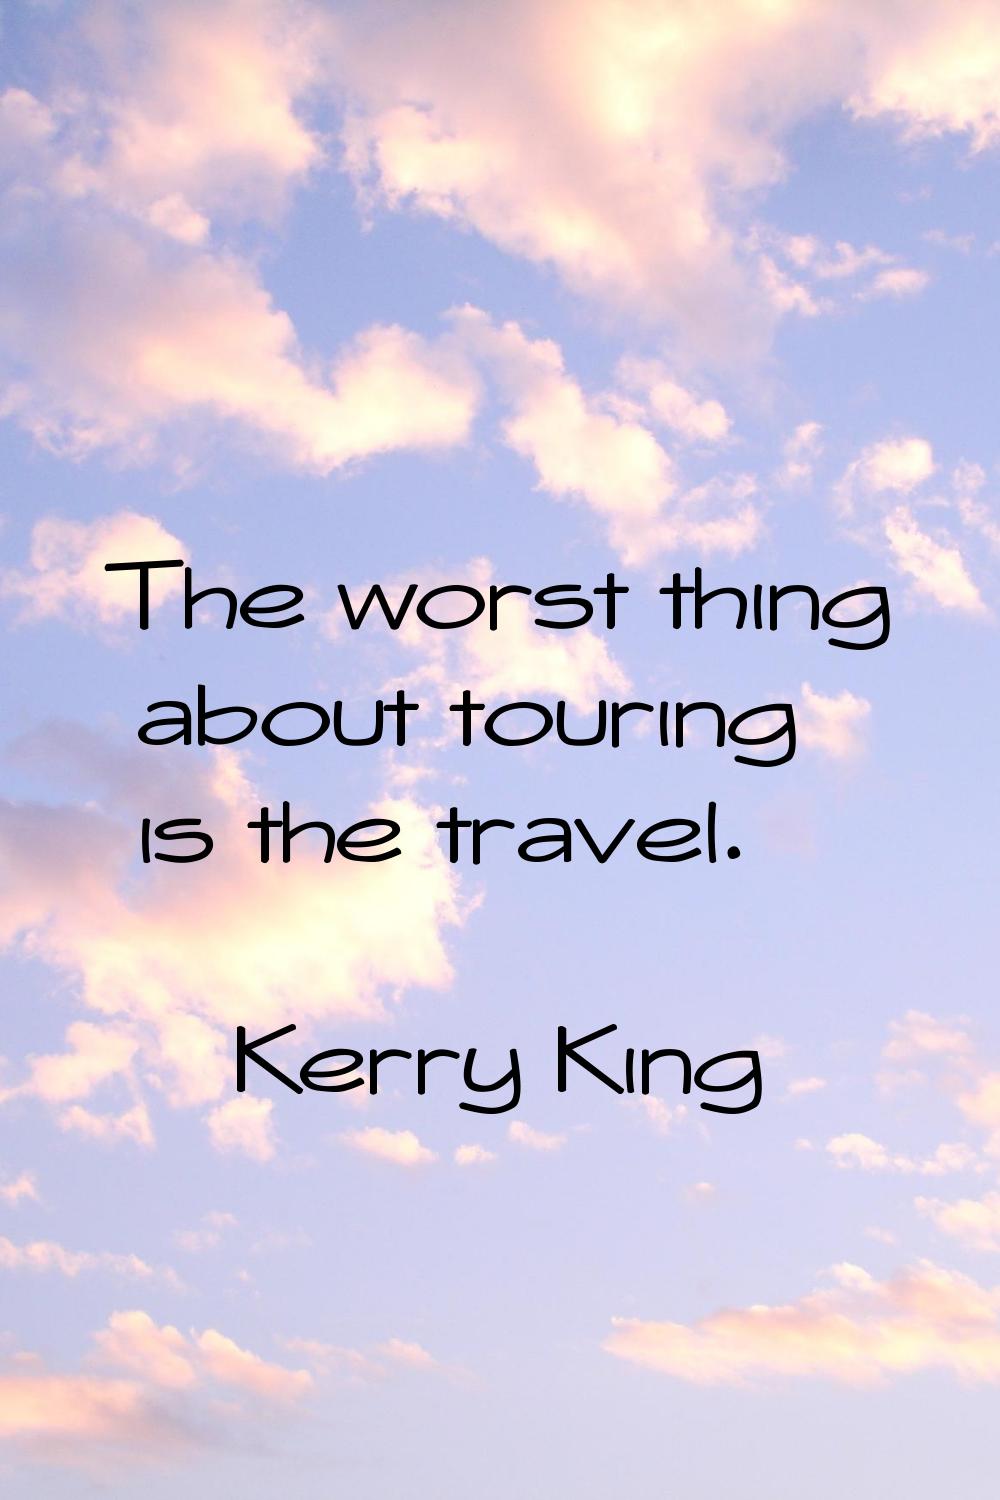 The worst thing about touring is the travel.